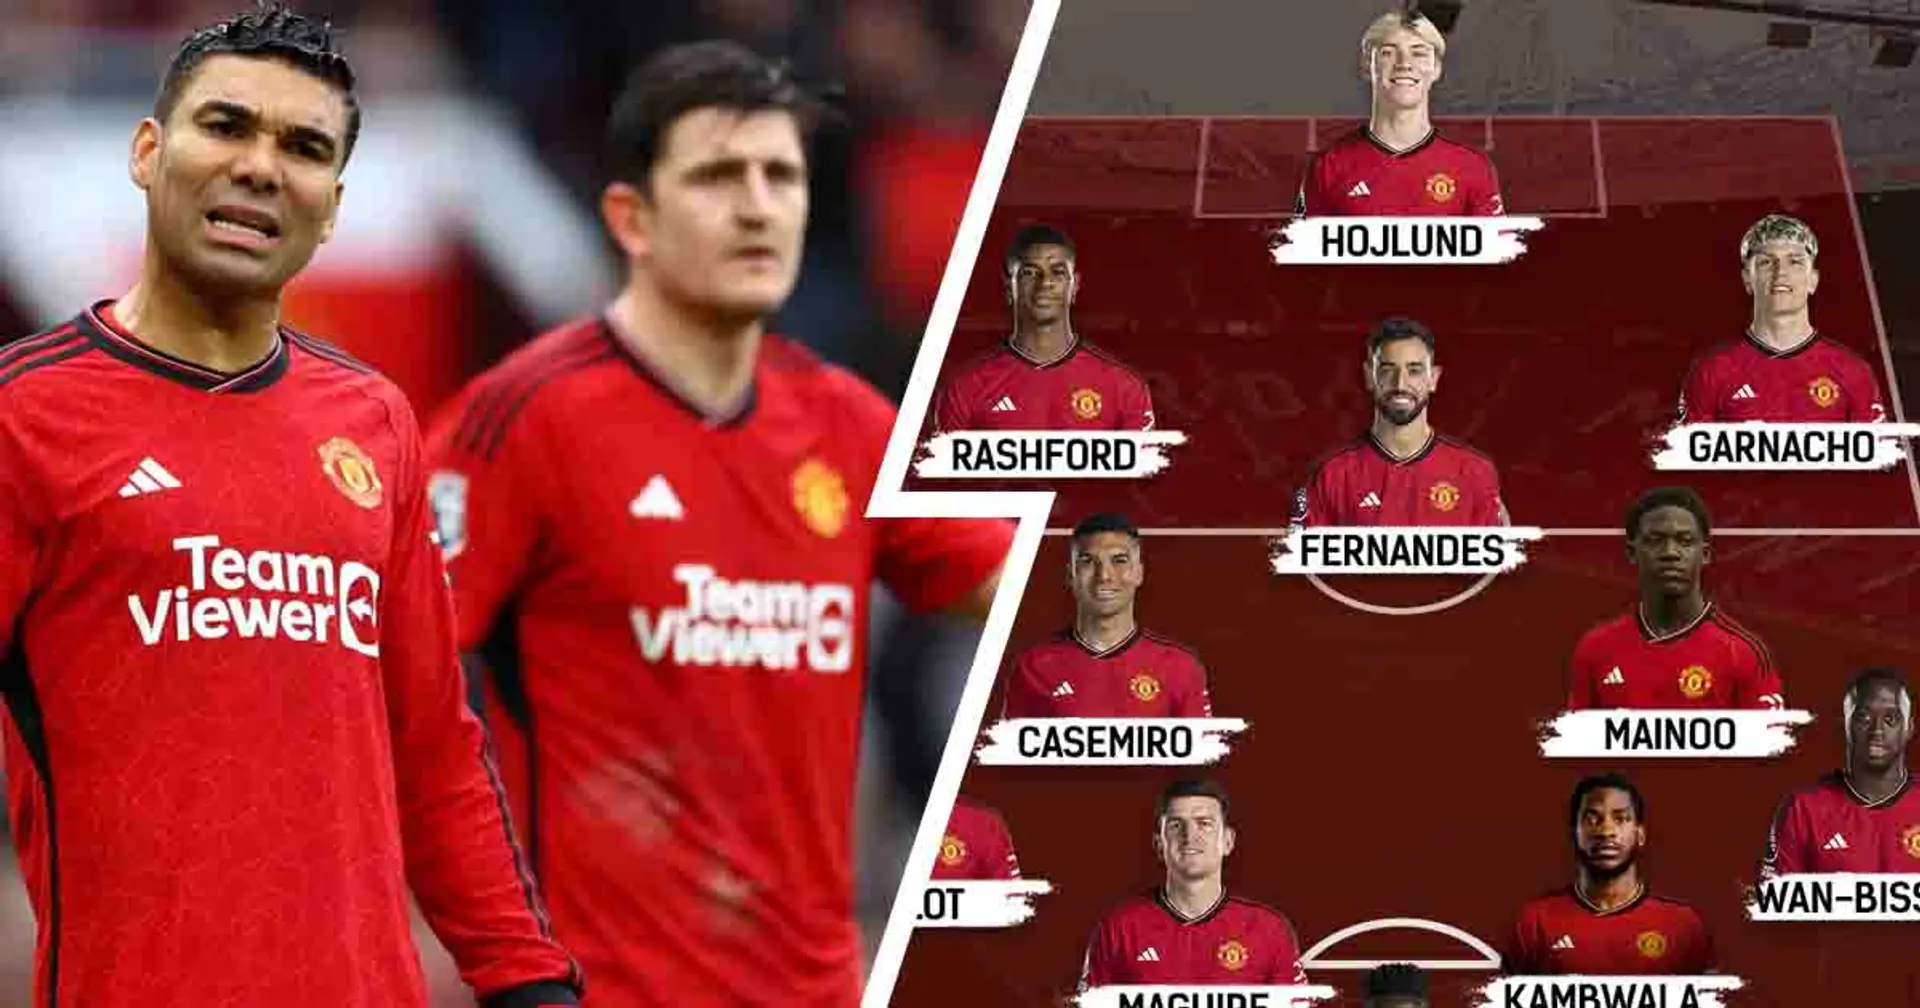 Man United's biggest weaknesses in Liverpool draw shown in lineup – 3 players feature